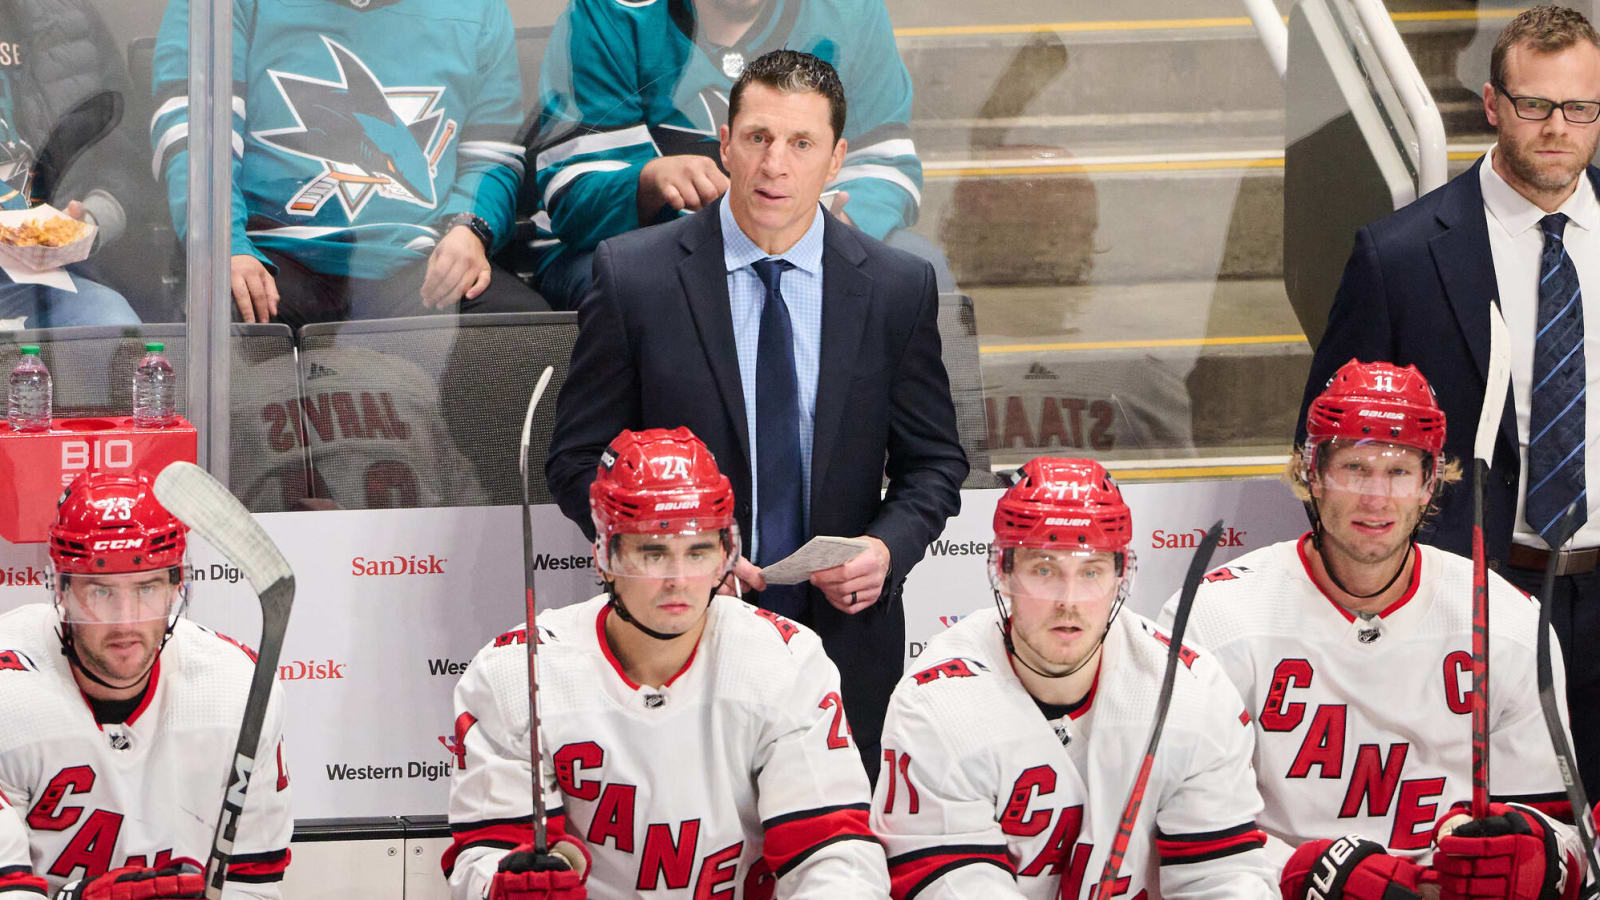 Rod Brind’Amour and the Hurricanes reach an agreement